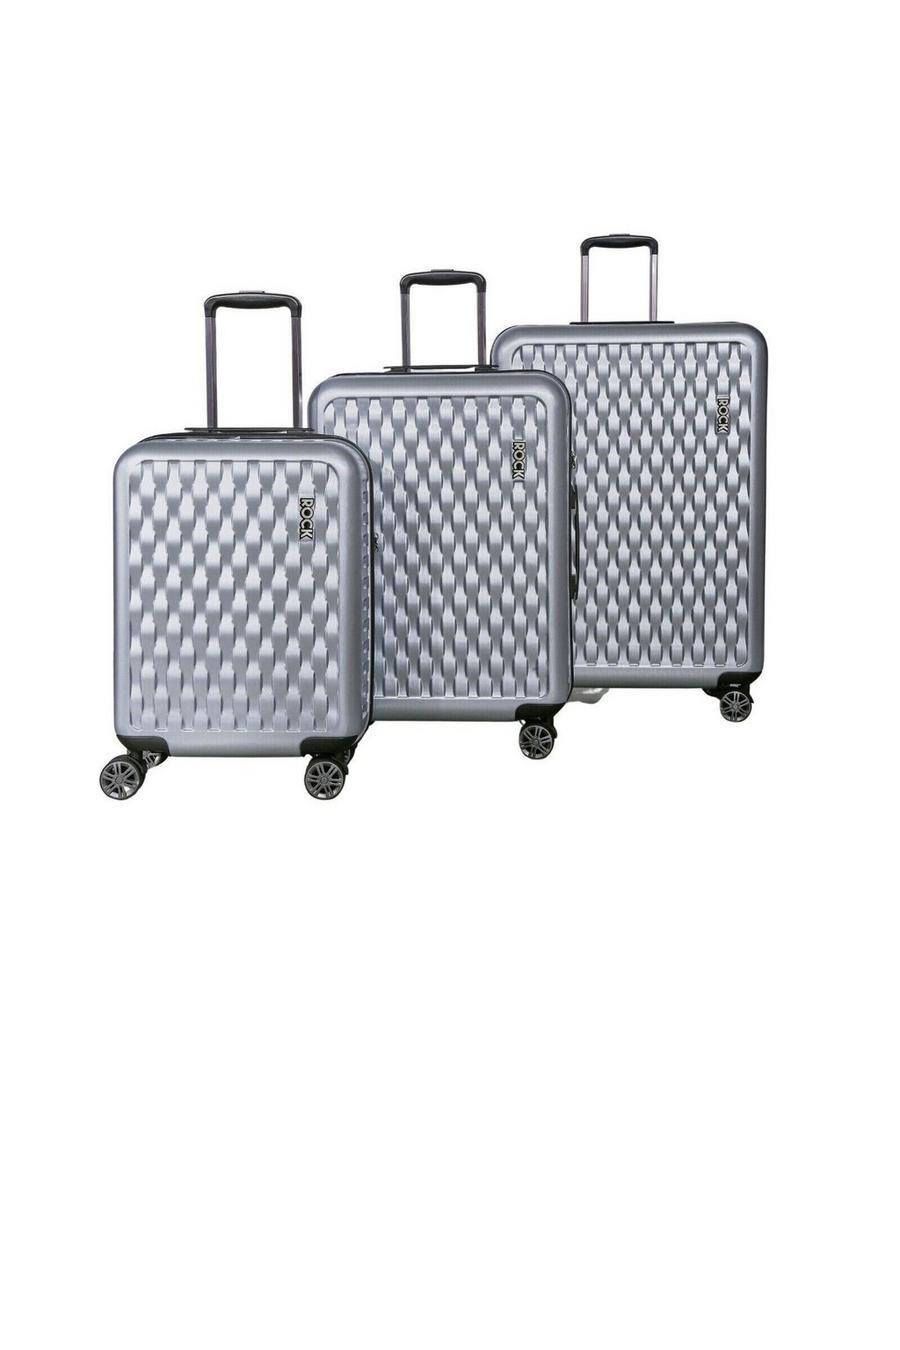 Silver Hard Shell Suitcase Luggage Bag